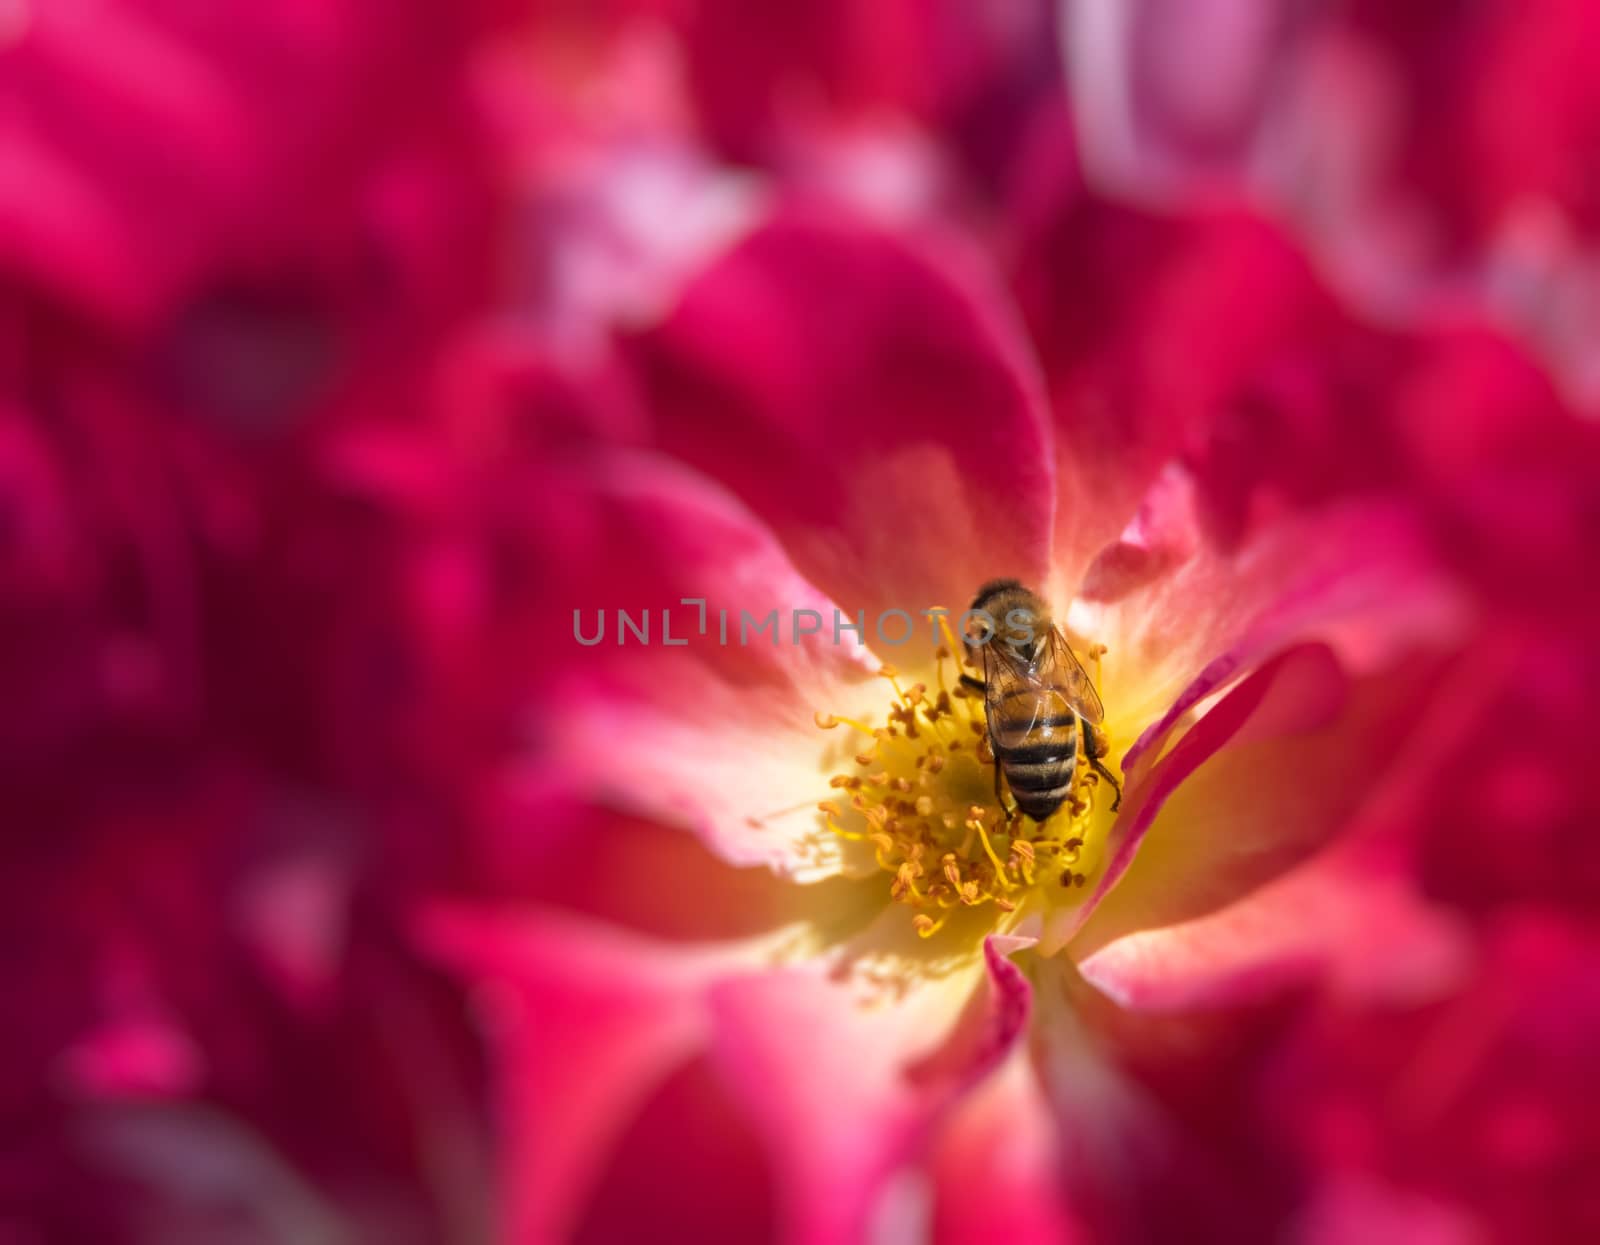 Honey Bee in a rose flower feeding and pollinating.